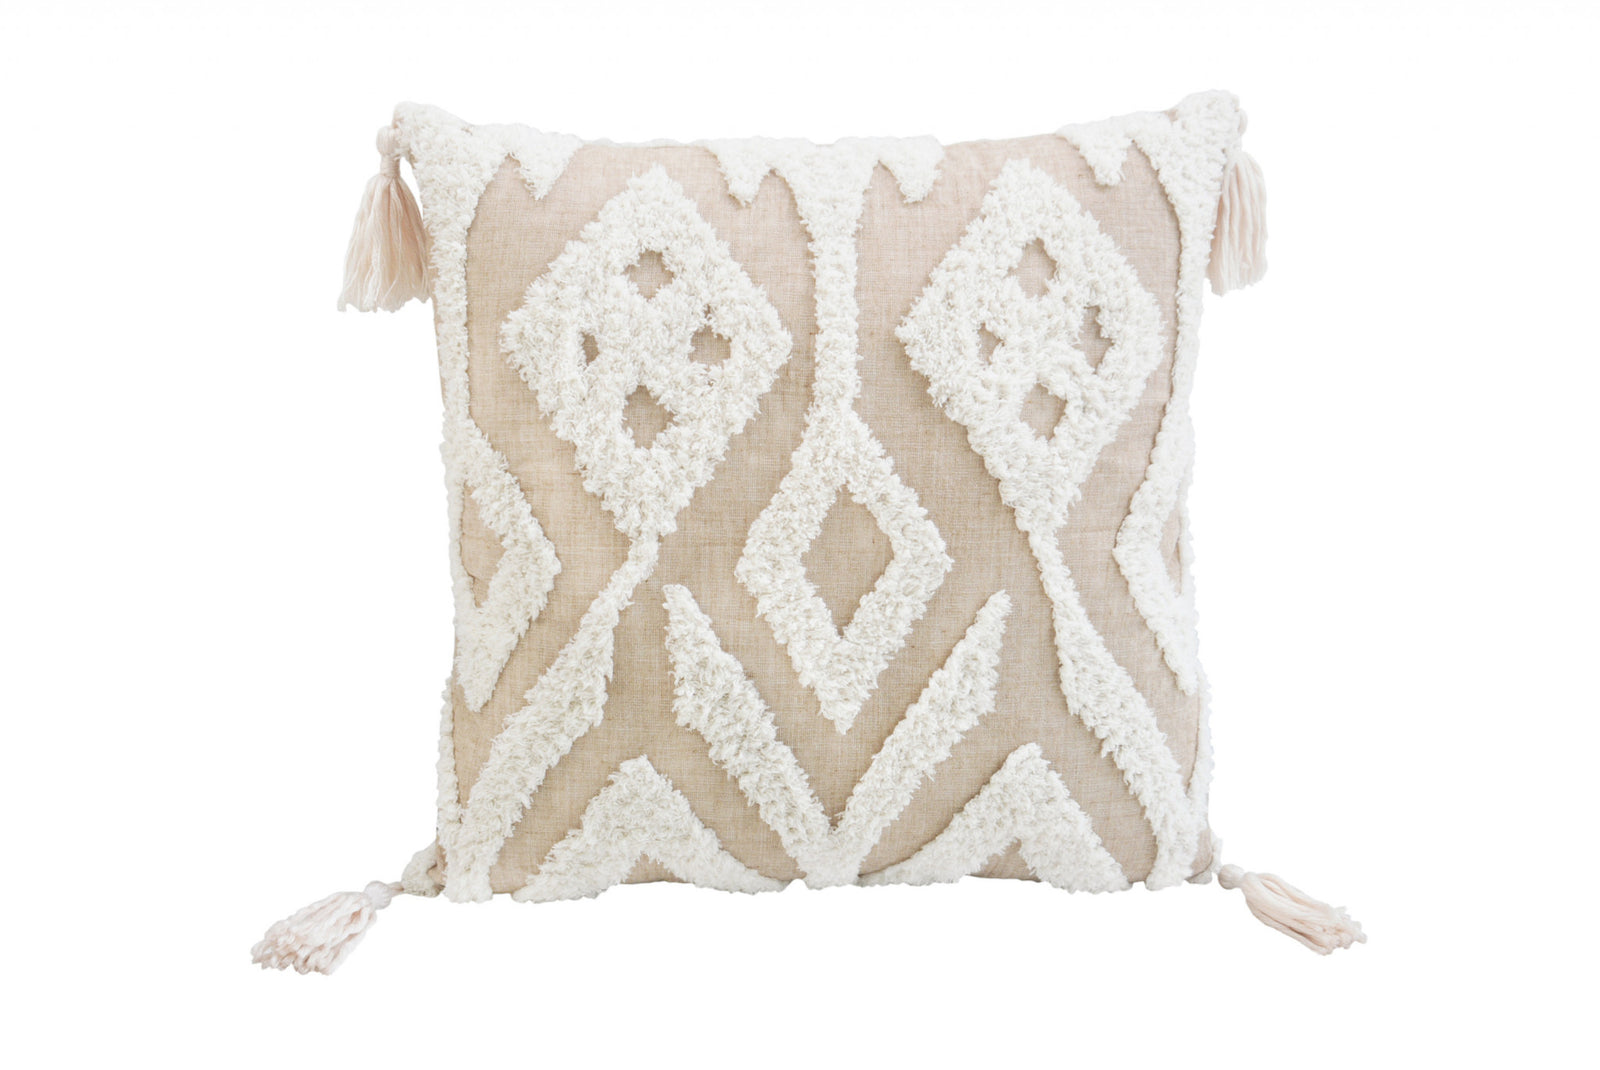 17" X 17" Beige And White Ikat Zippered Polyester Throw Pillow With Tassels